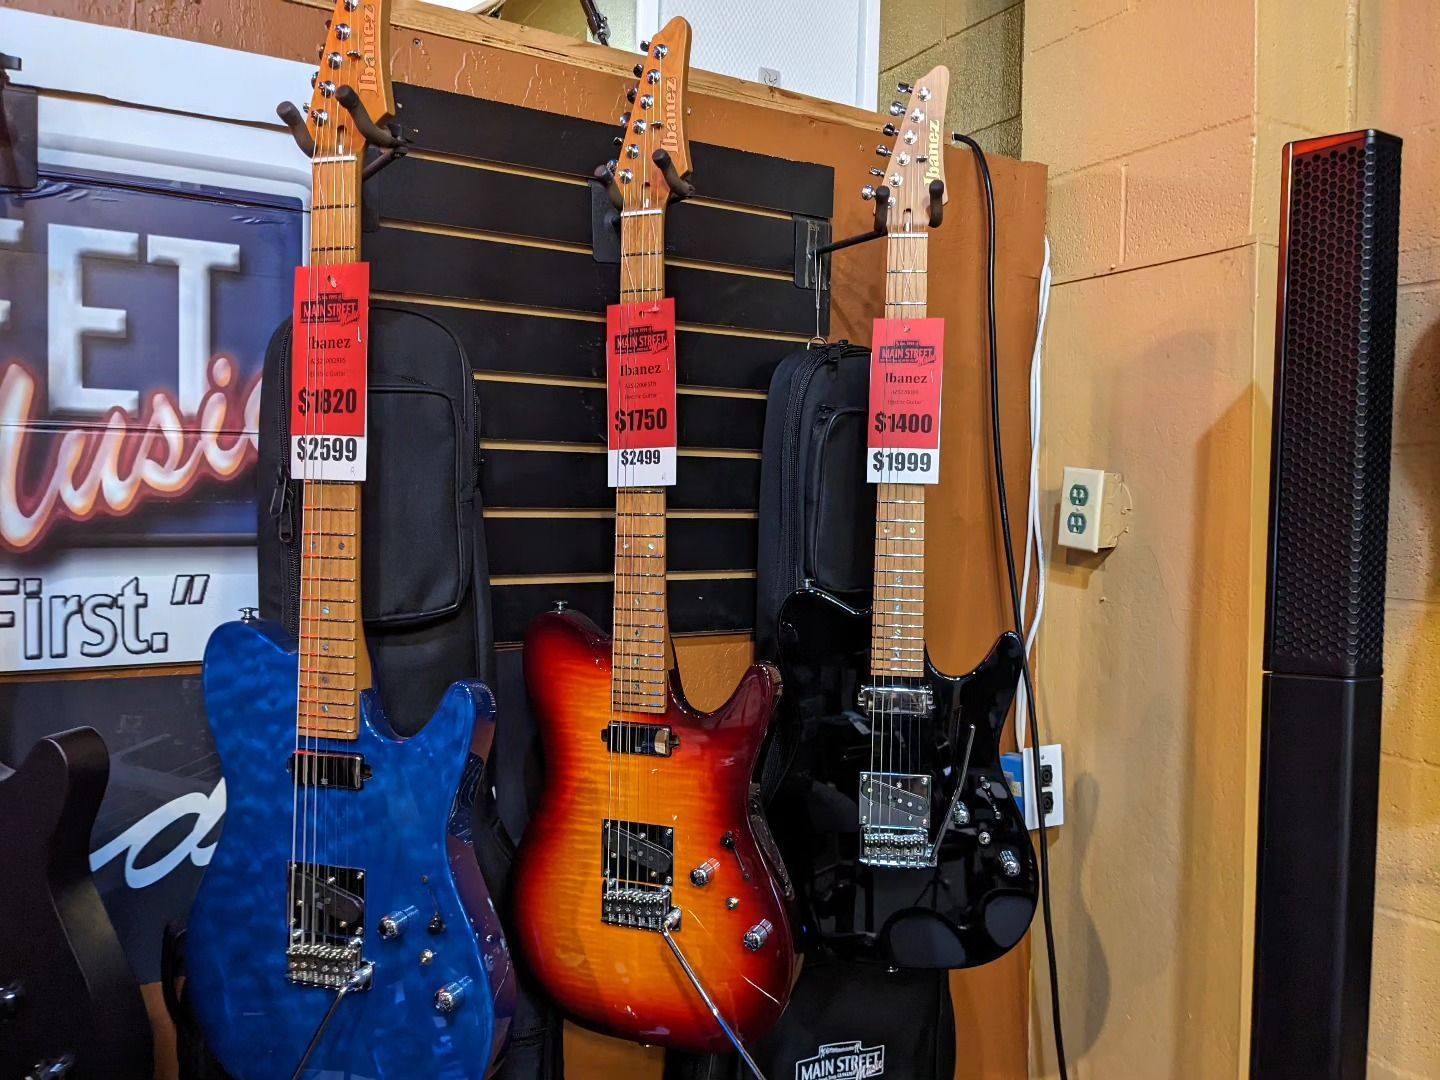 three electric guitars are hanging on a wall in front of a sign that says first